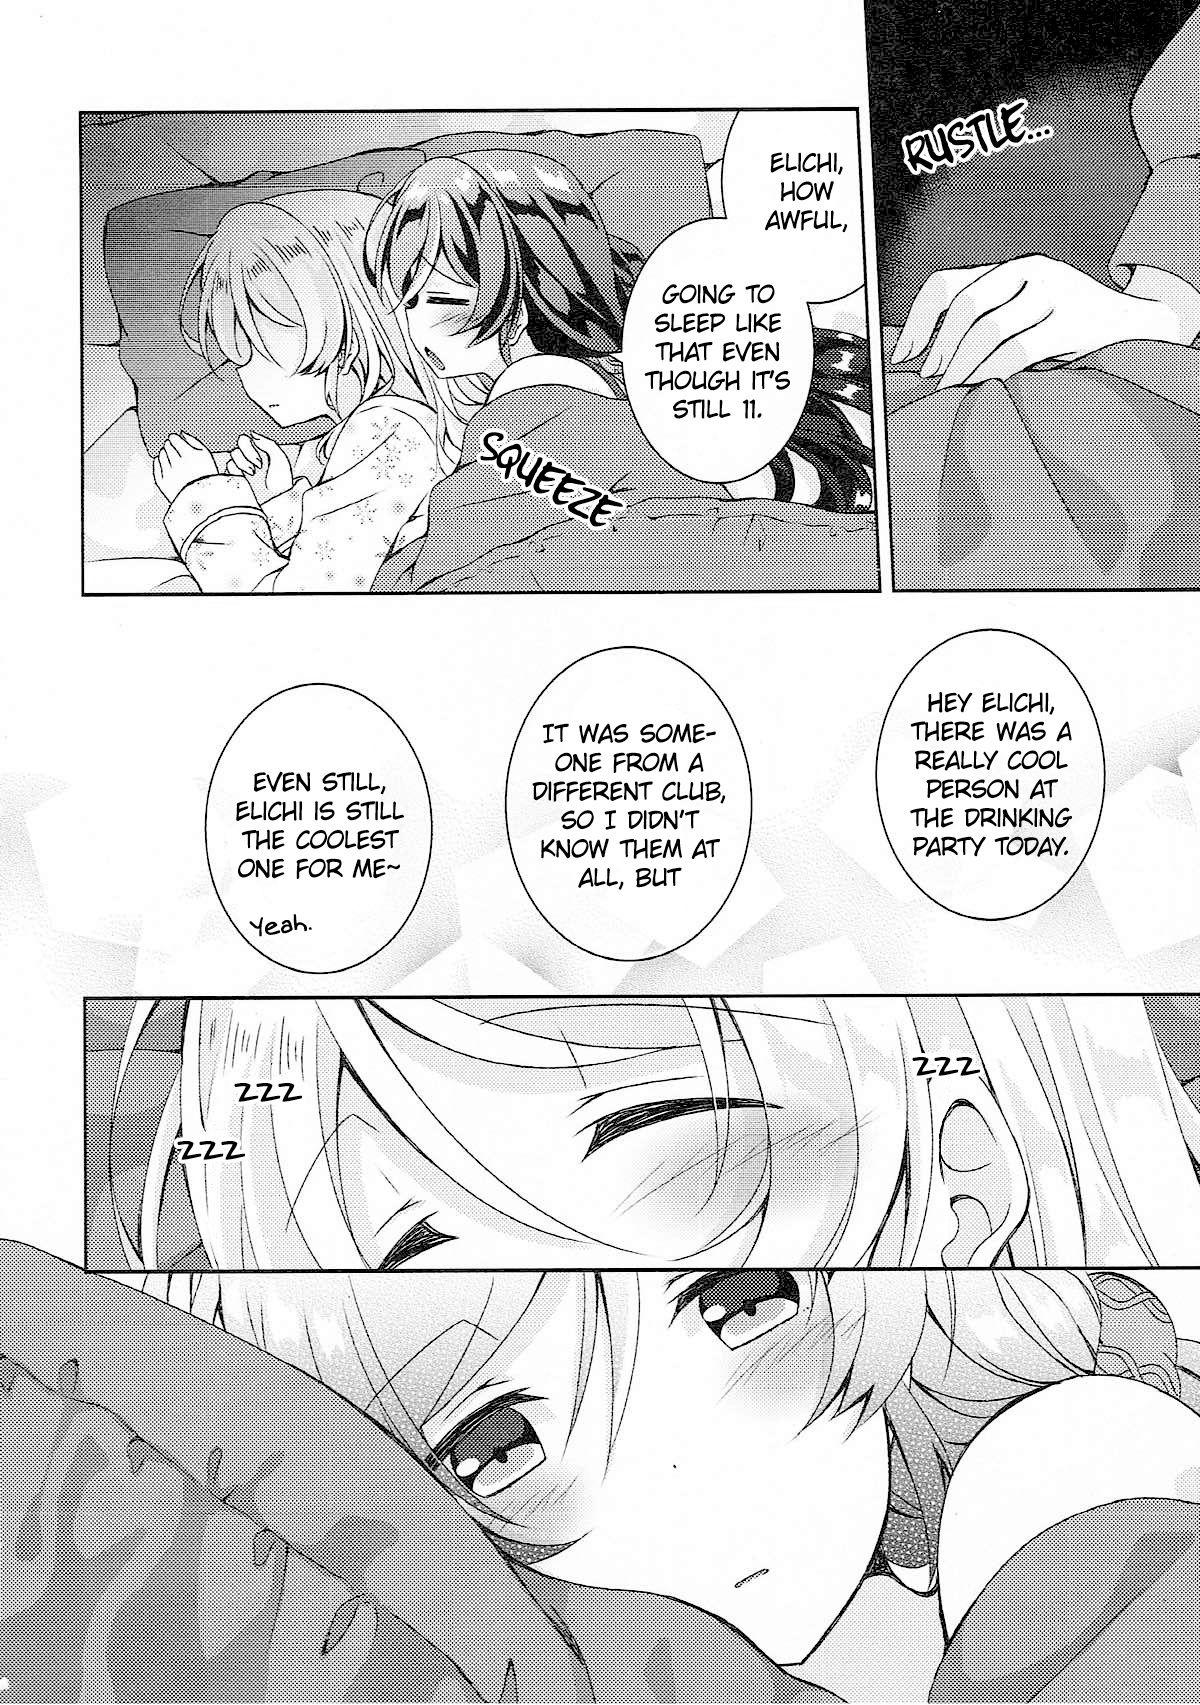 Italian Sex to Uso to Yurikago to | Sex, Pretend, and Cradle - Love live Bear - Page 3